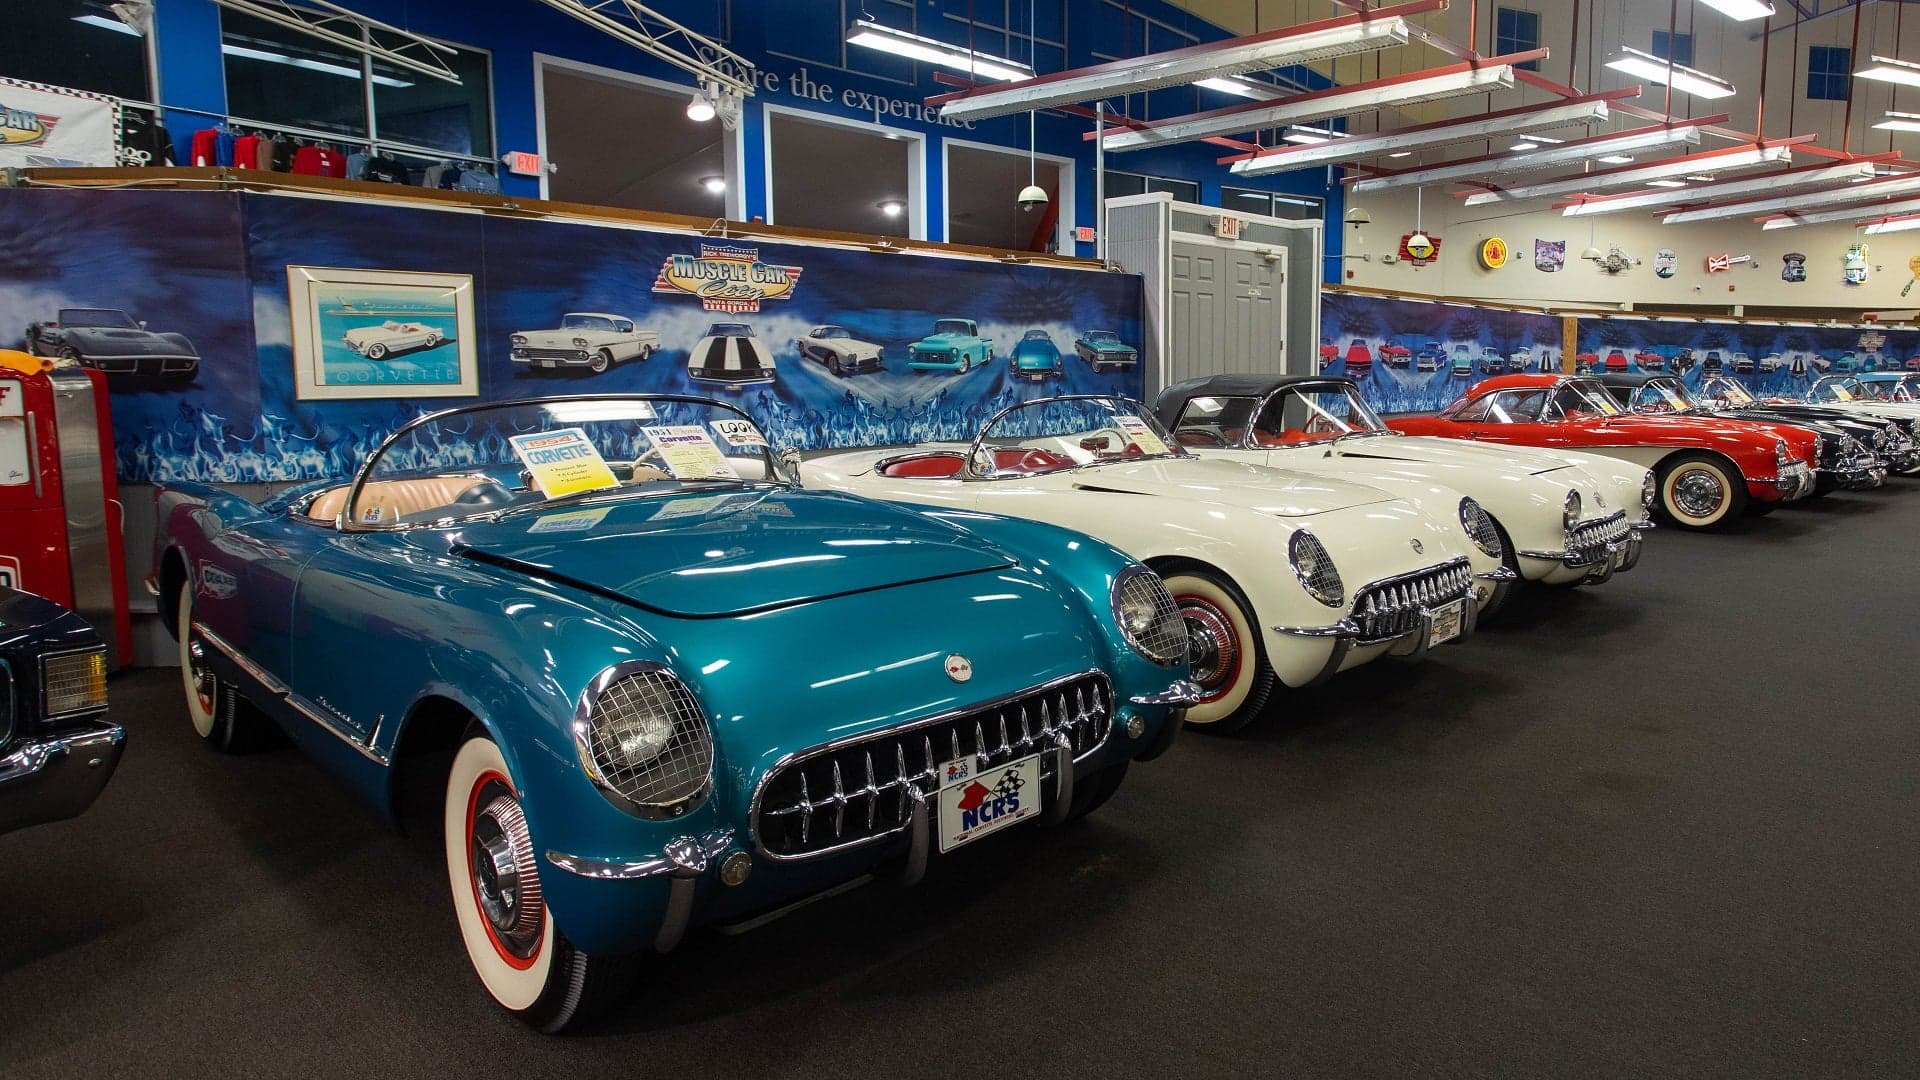 A Florida Muscle Car Museum Is Selling More Than 200 American Classics at No Reserve